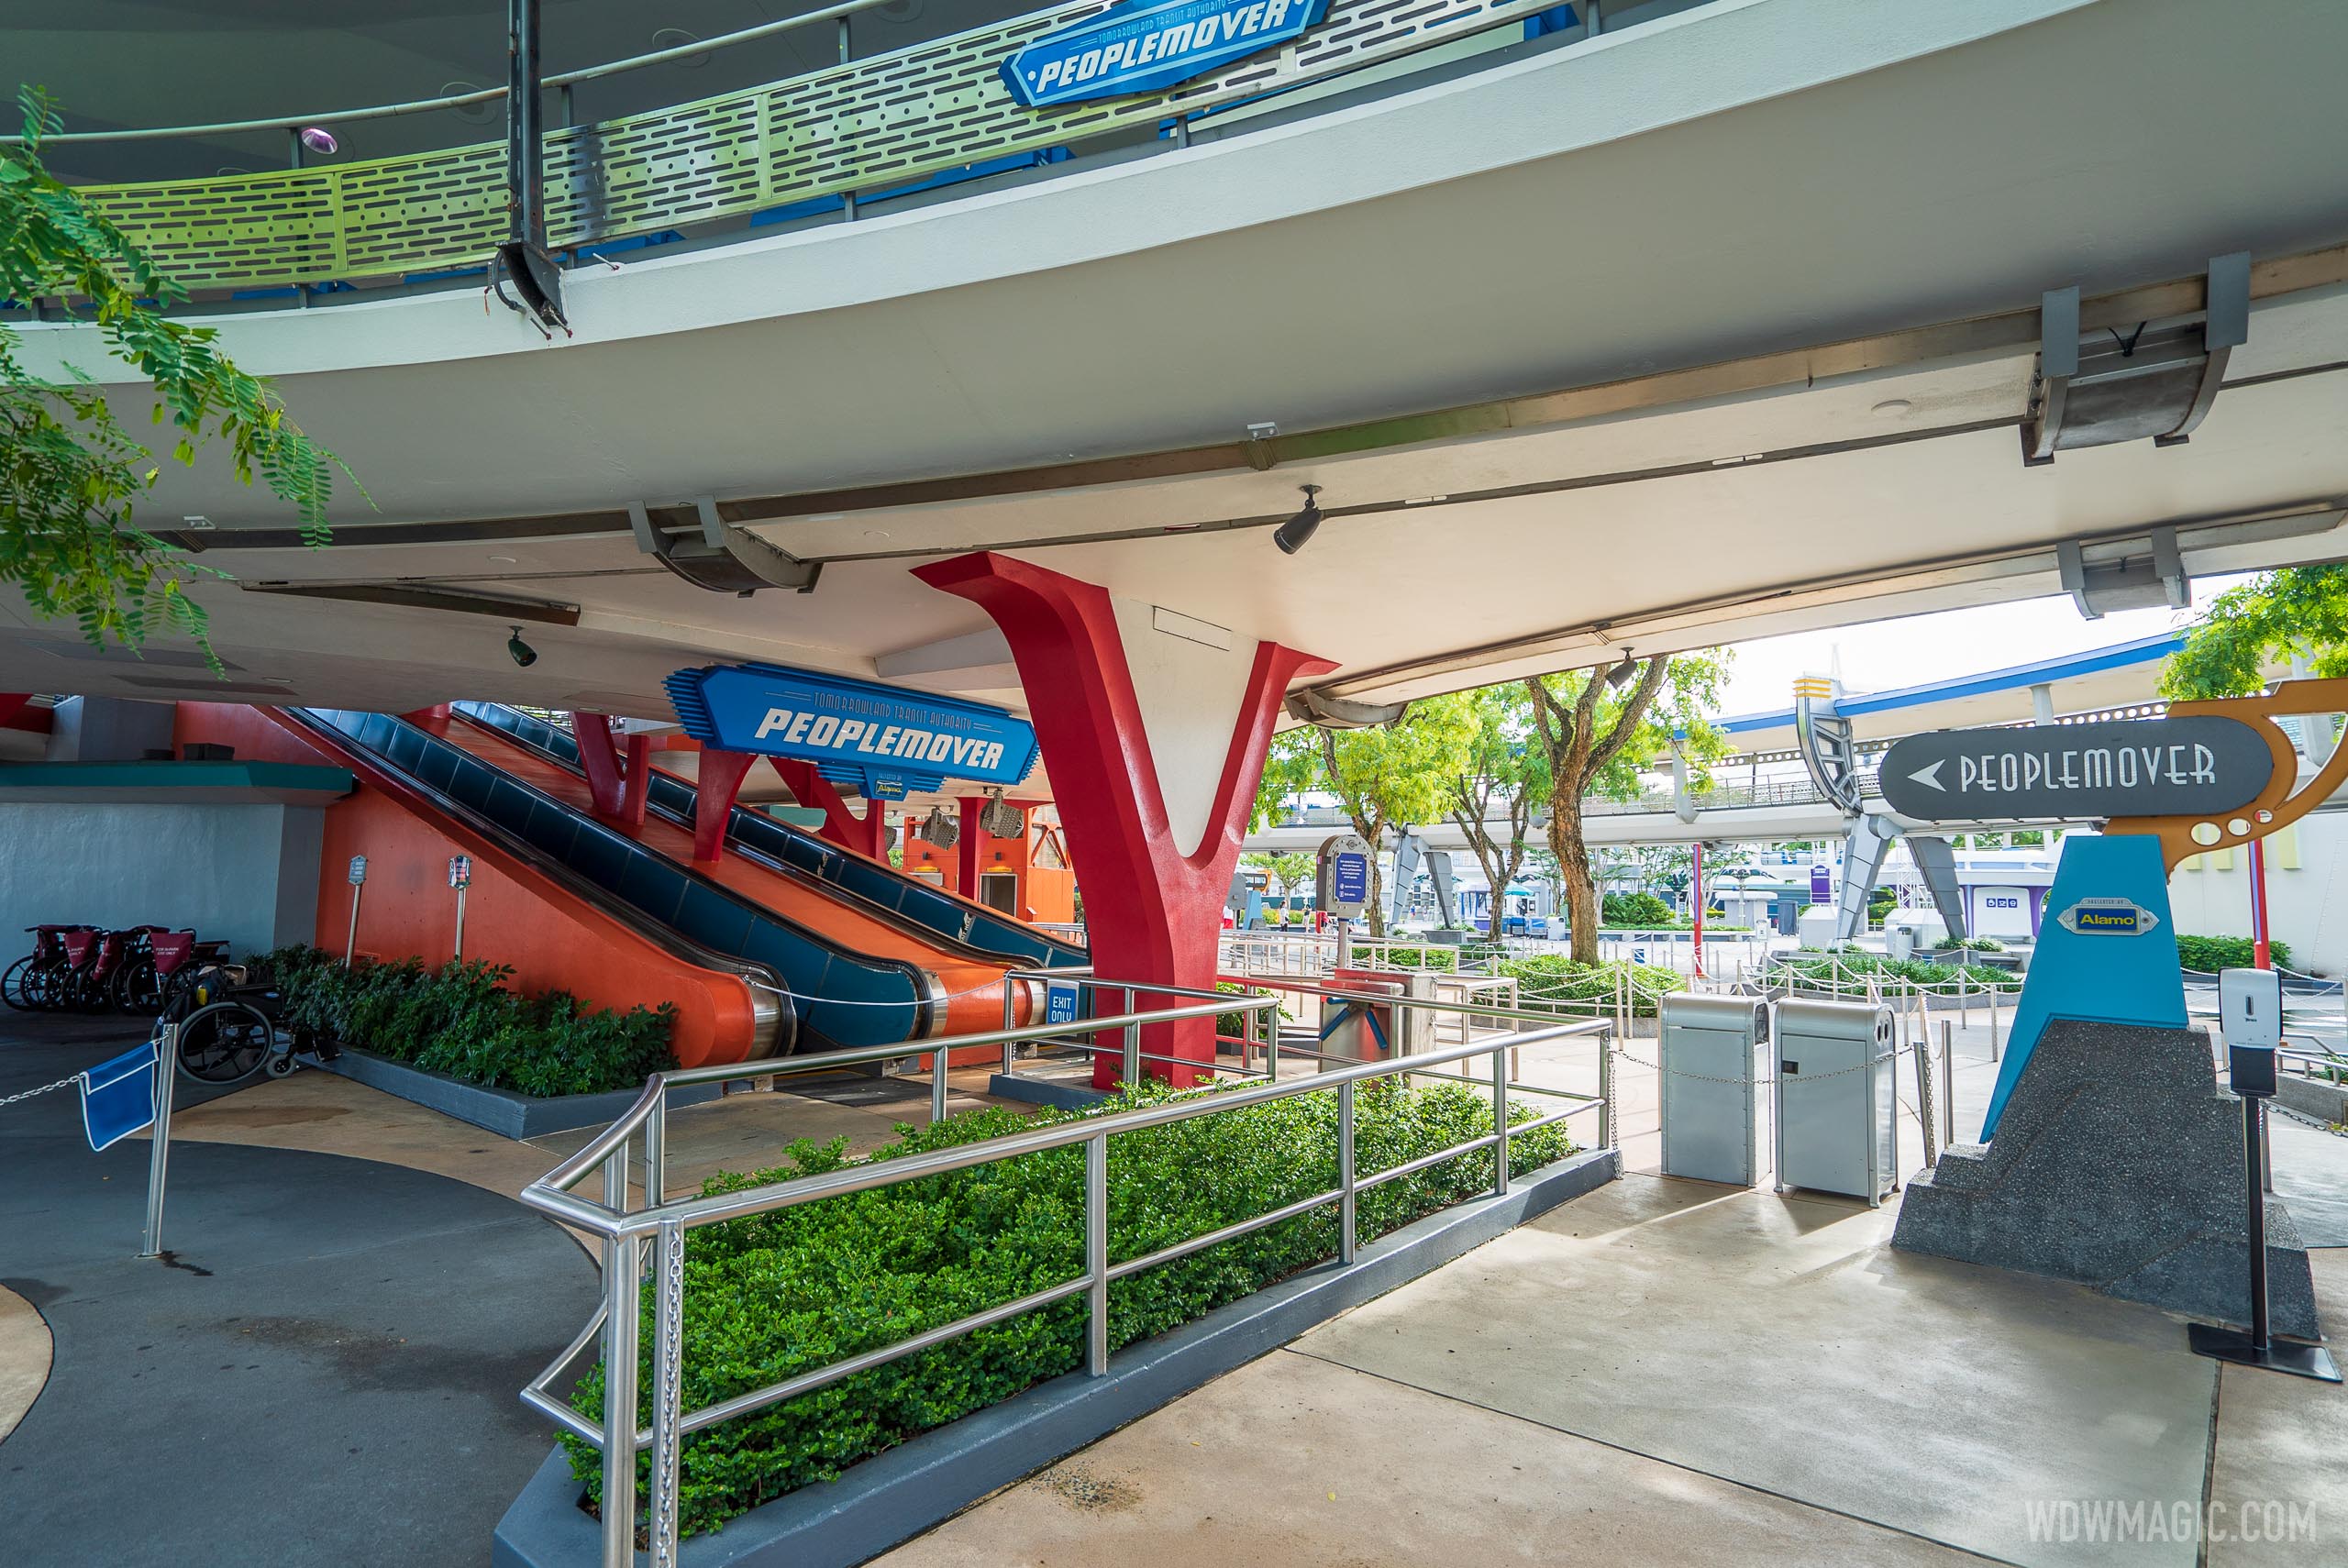 Tomorrowland Transit Authority PeopleMover refurbishment extended once again